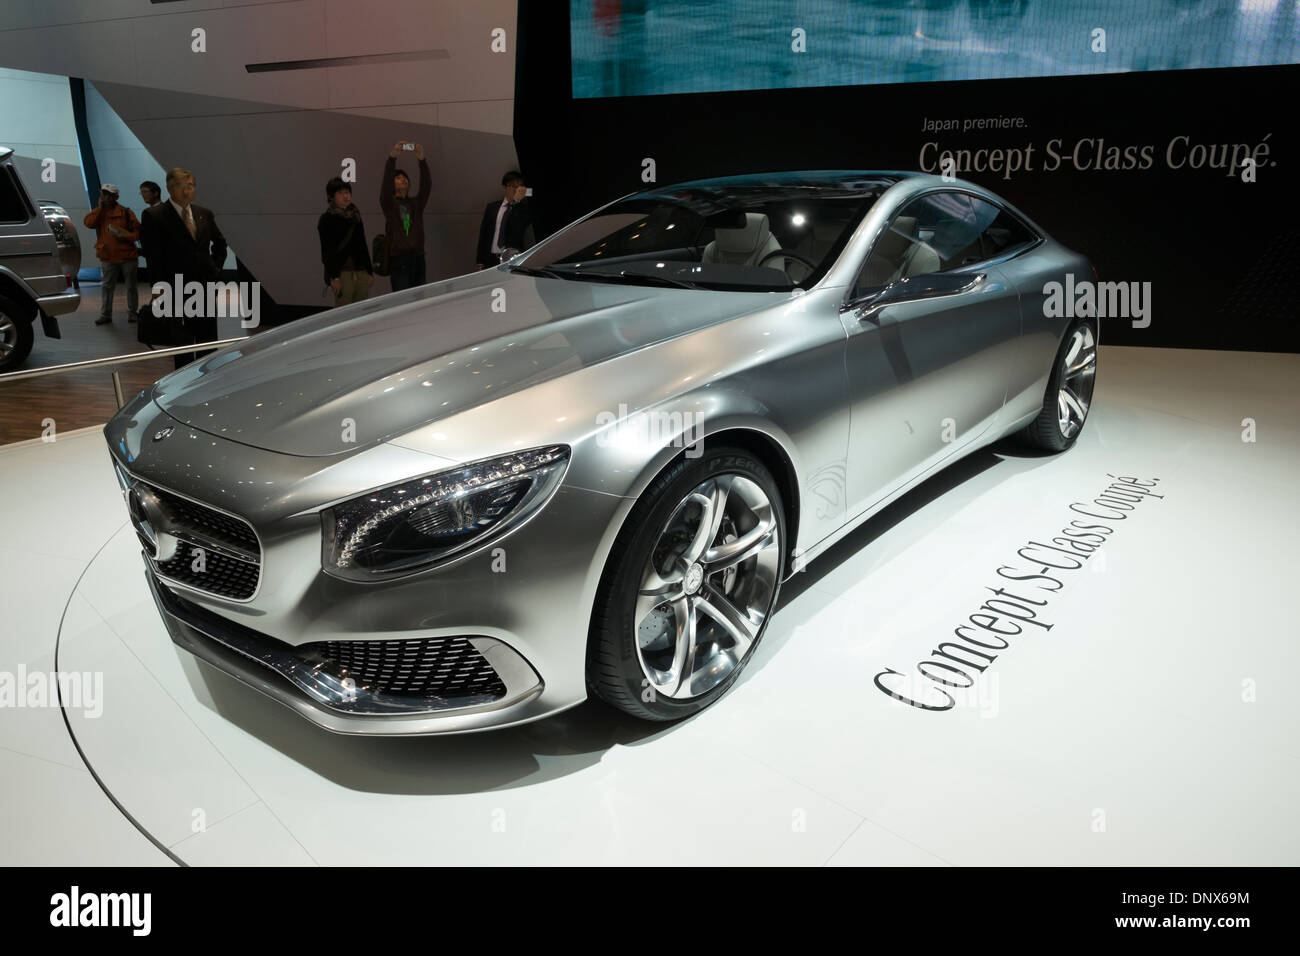 Mercedes concept S-Class Coupe at Tokyo Motor Show 2013 in Japan Stock Photo